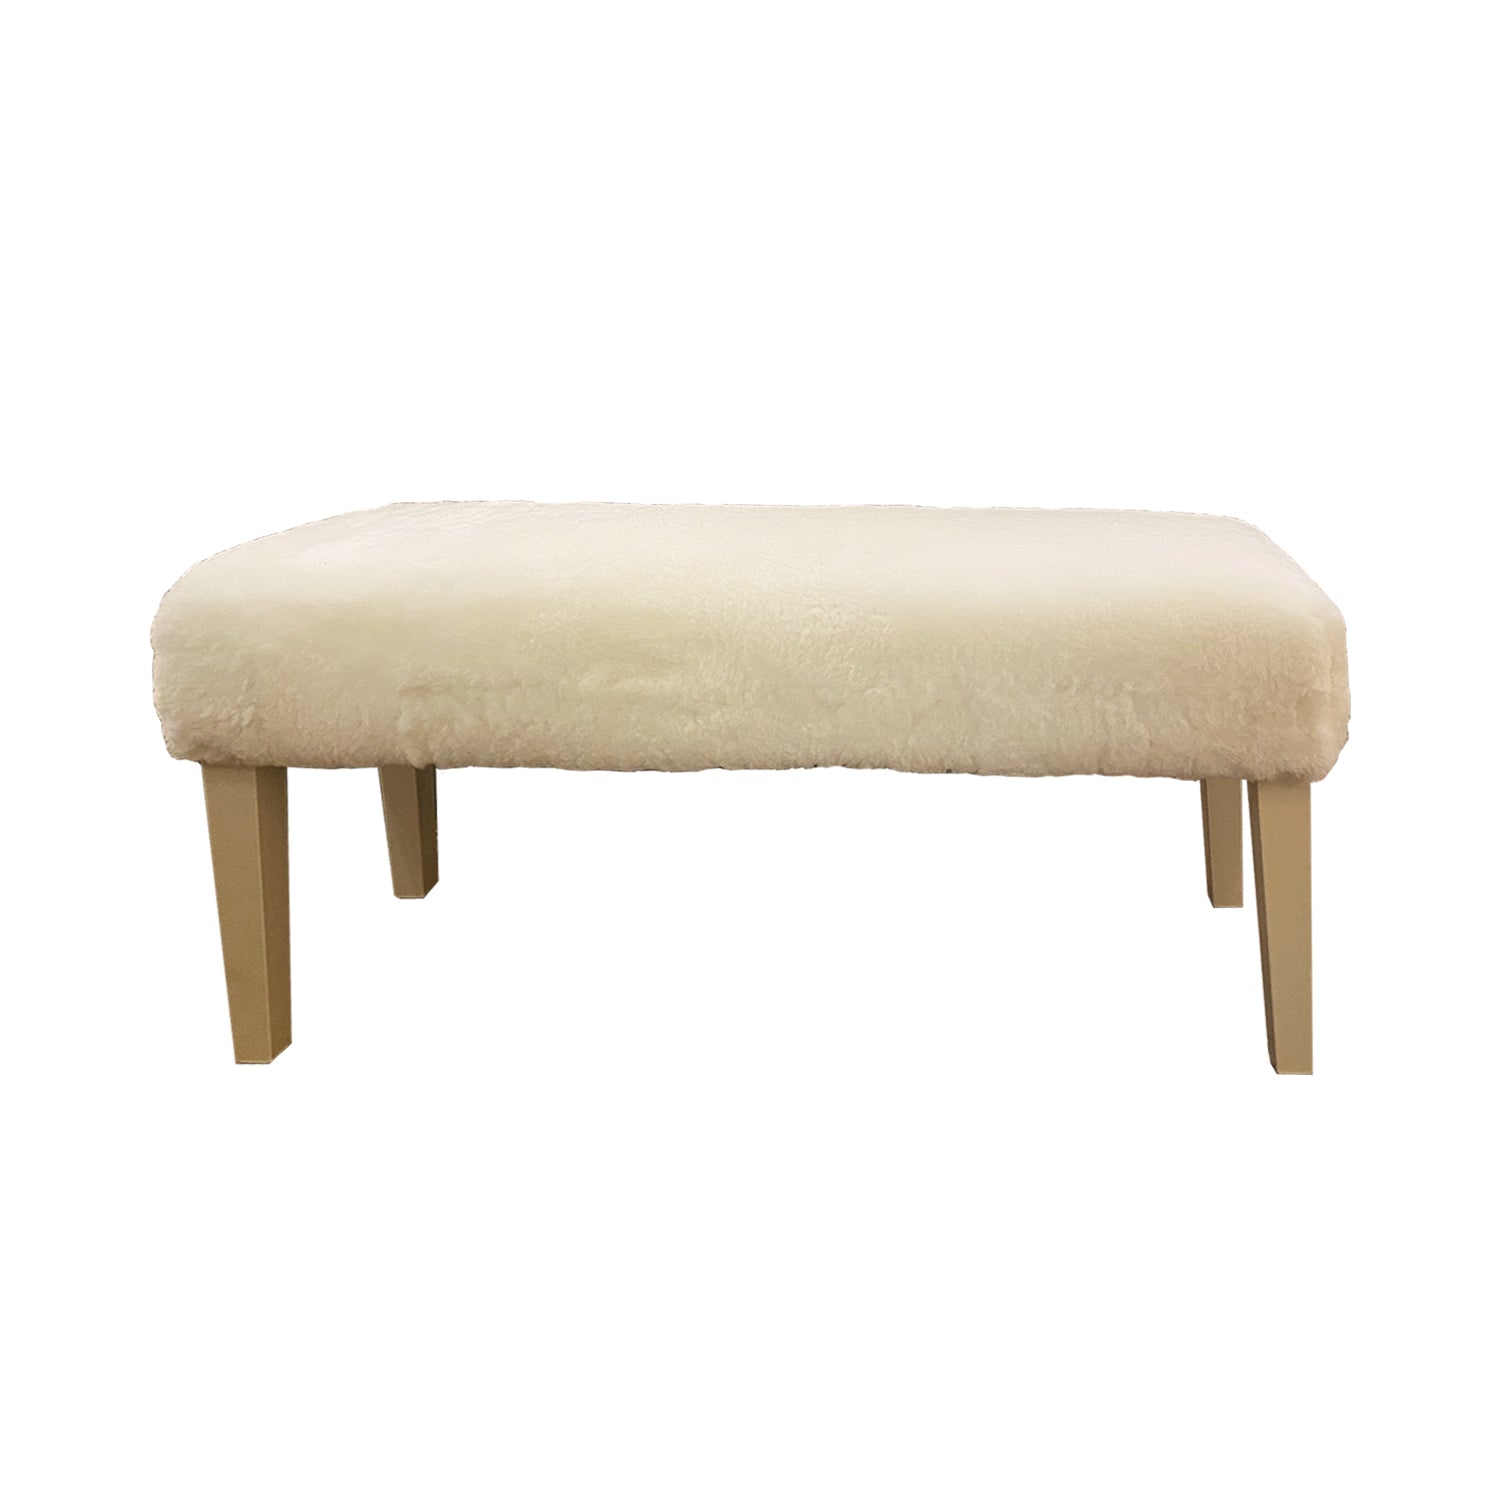 White shearling sheepskin bench with cream lacquer base adds a sophisticated edge to any space.